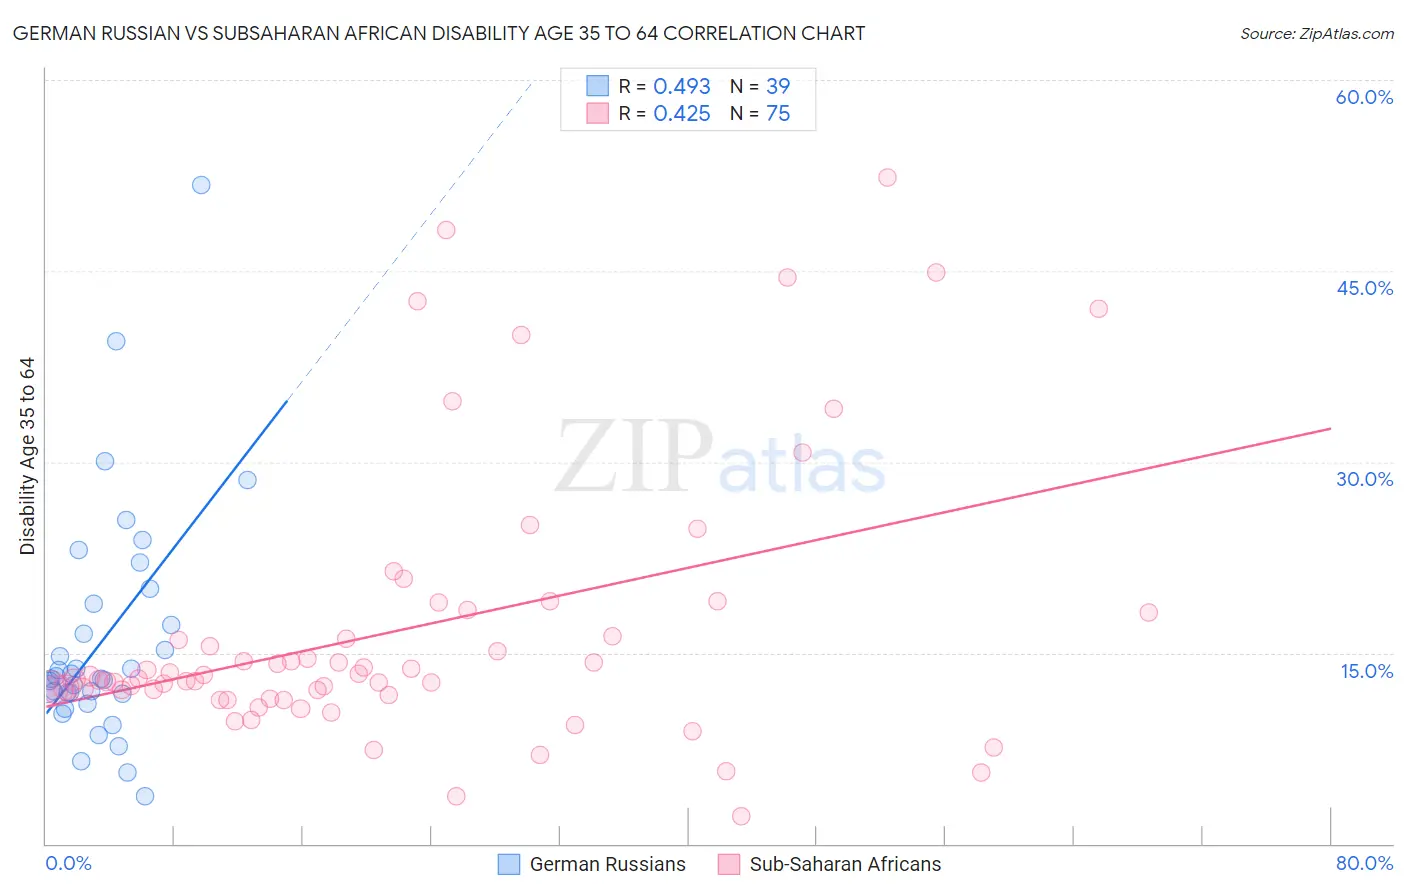 German Russian vs Subsaharan African Disability Age 35 to 64